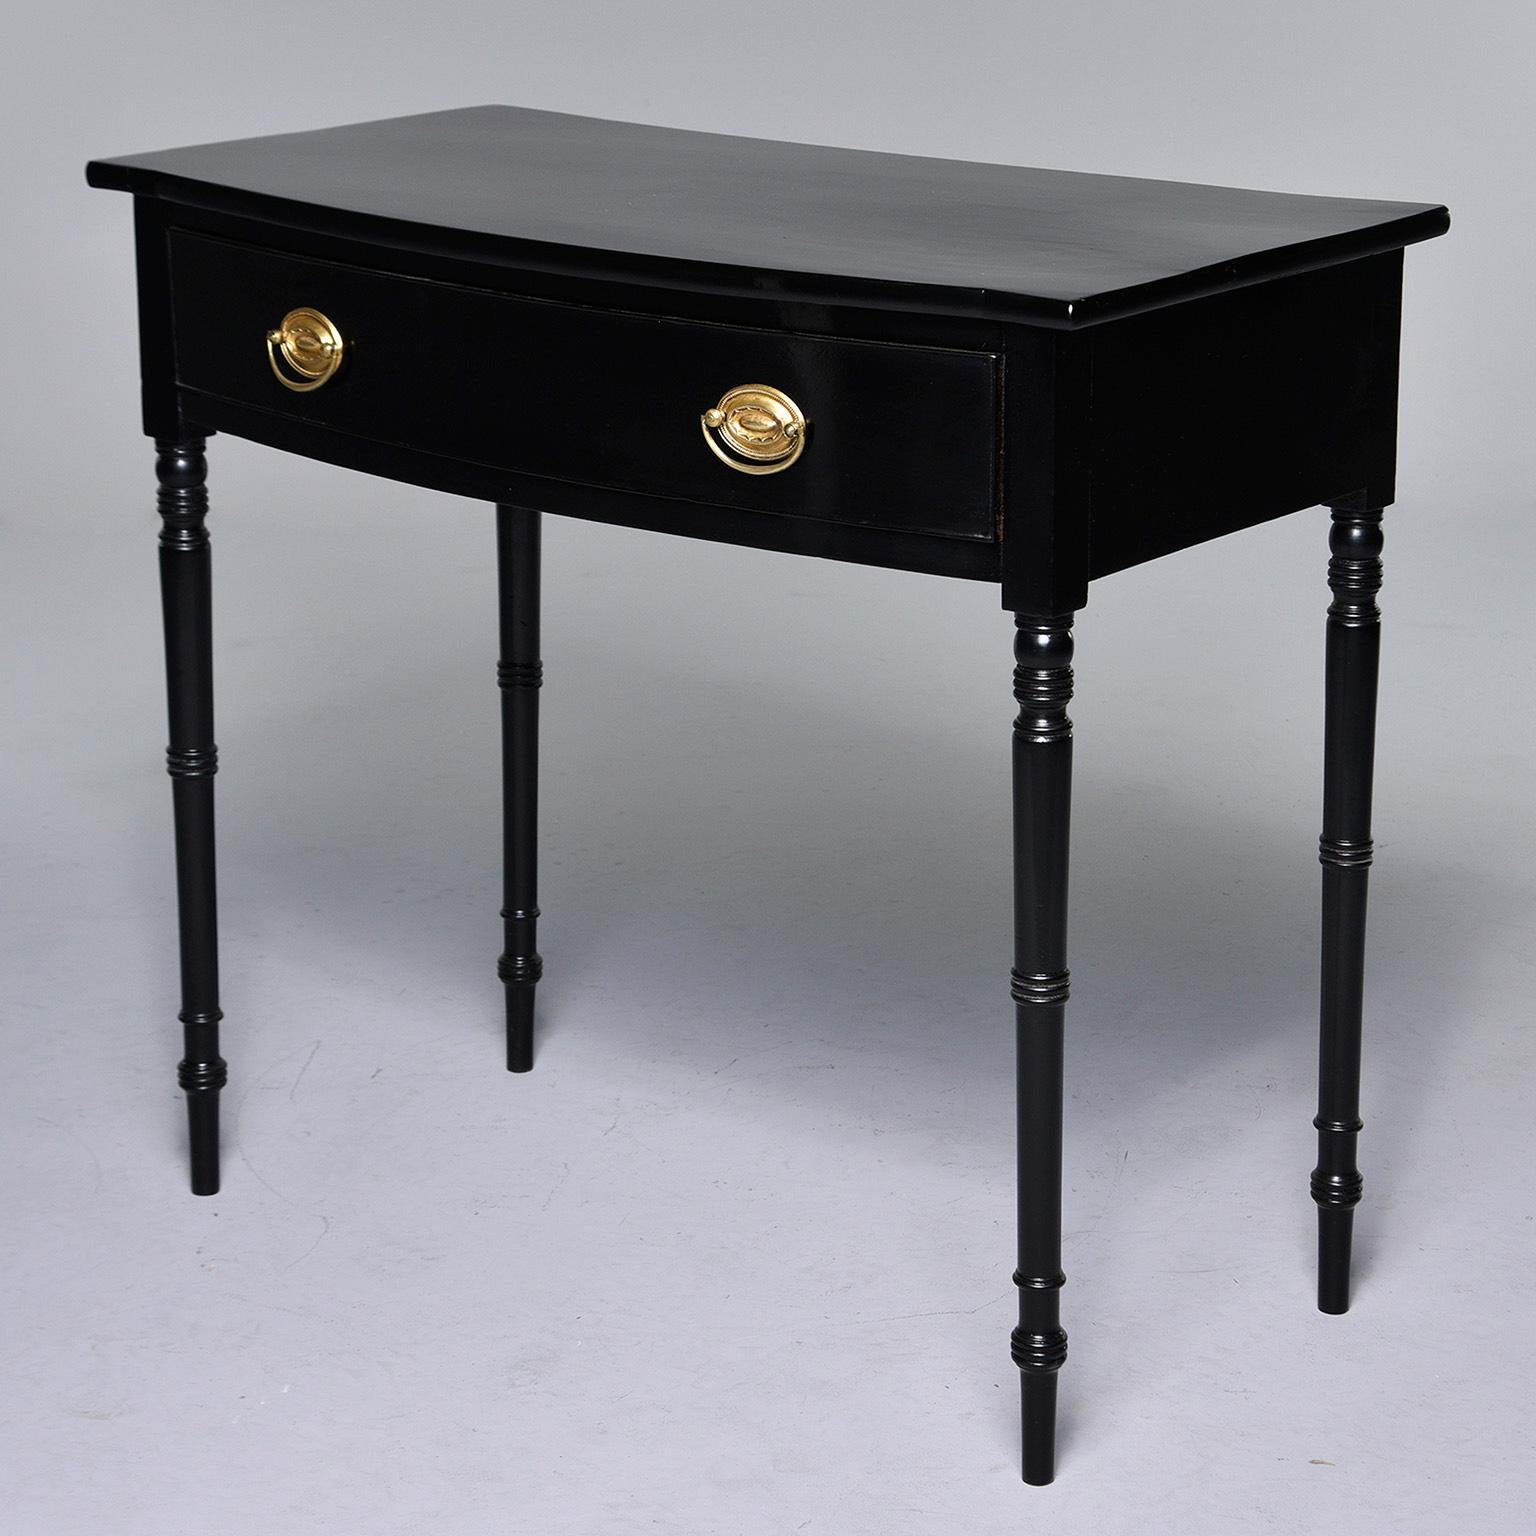 English mahogany side table with curved front, slender turned legs, single functional drawer with brass hardware and new, ebonized finish, circa early 1900s. Unknown maker.